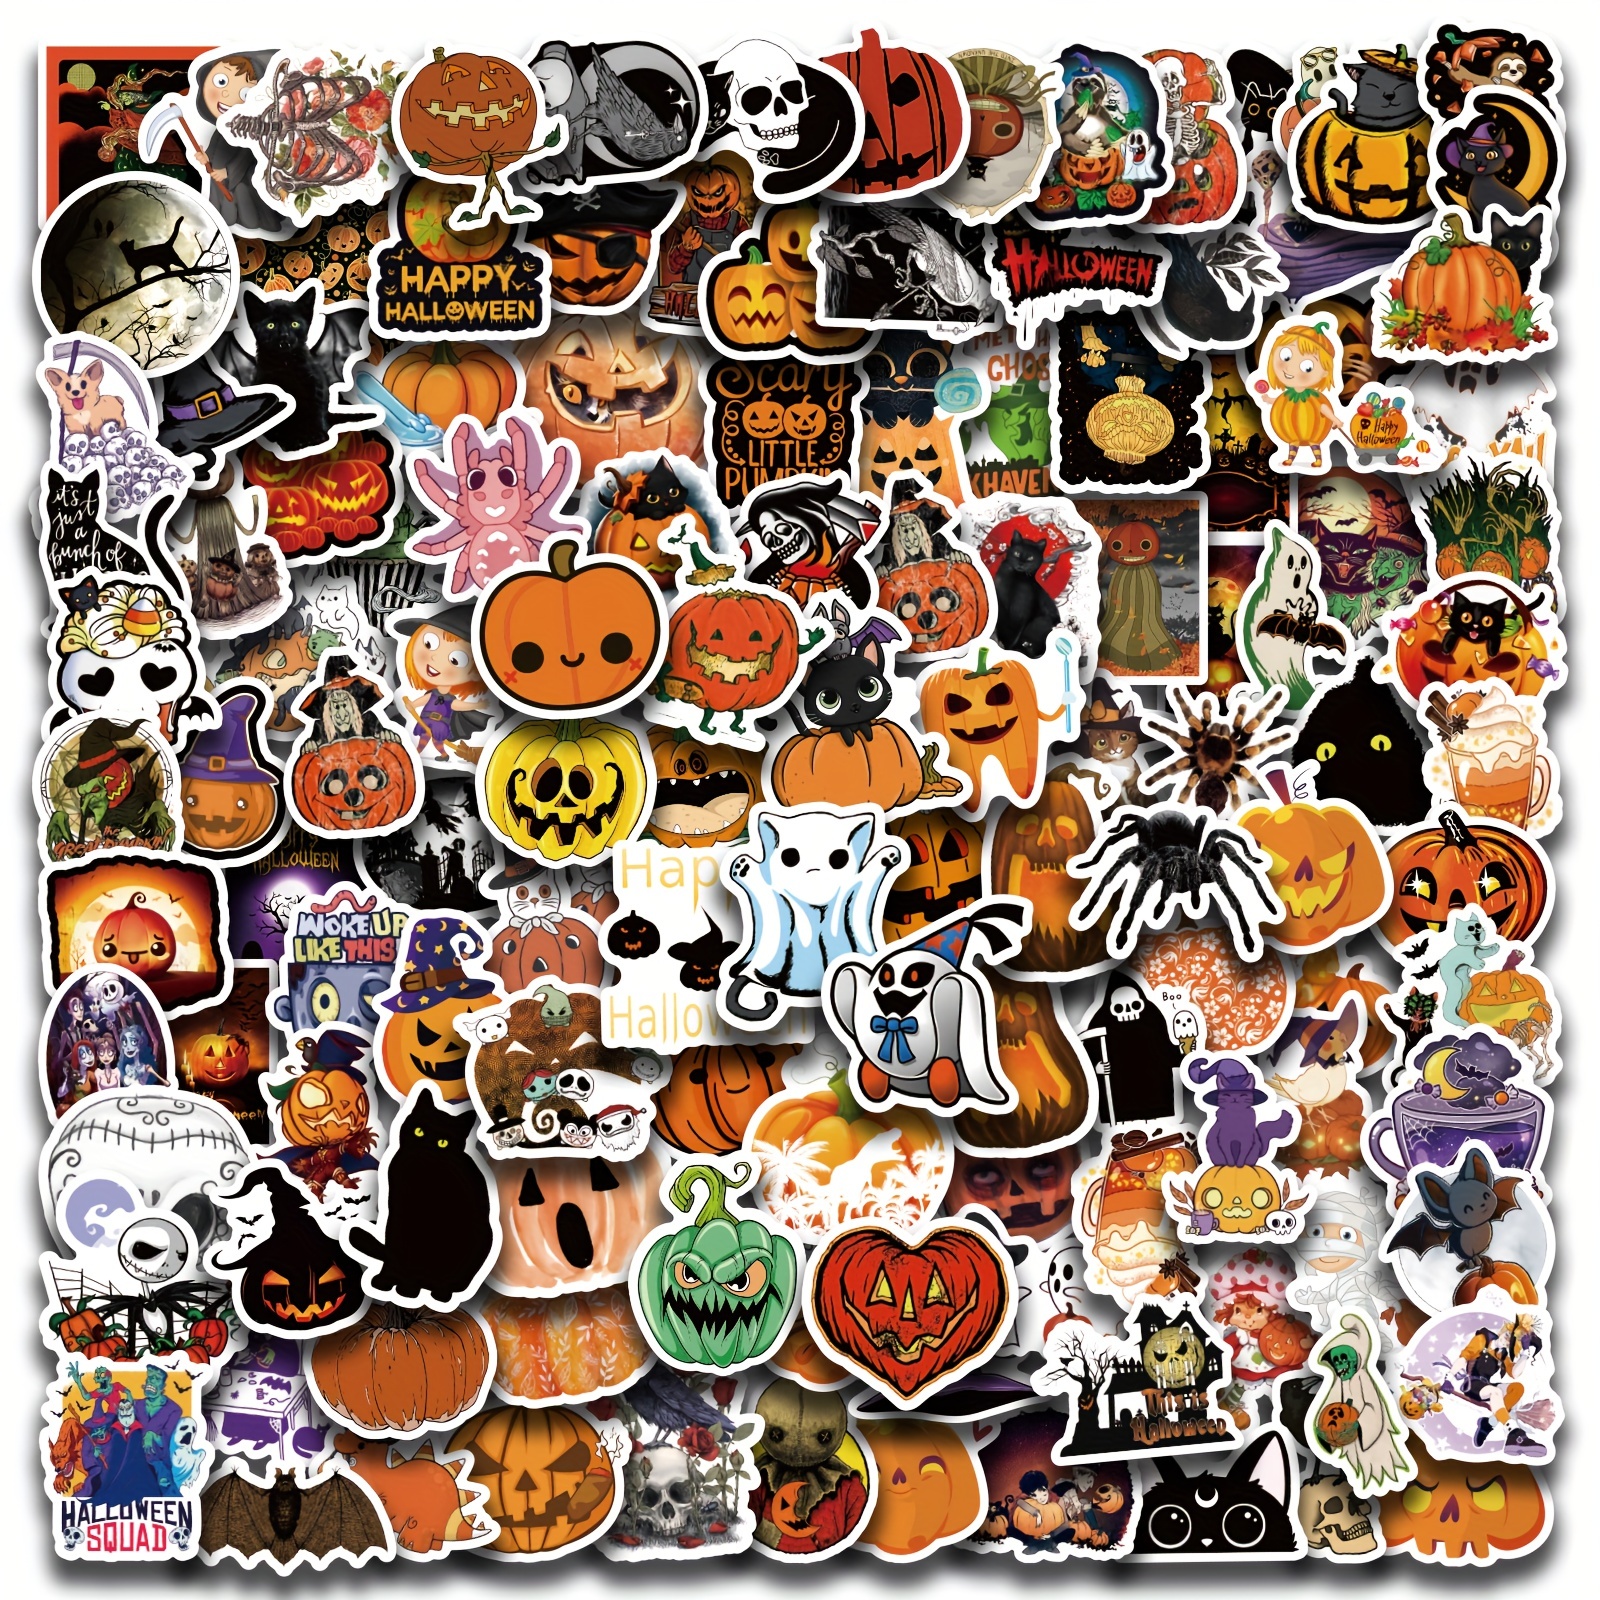 Sticker Bomb Pack Vinyl Wrap 100 Pcs,Funny Stickers Packs for  Adults,Cars,Motorcycle,Bicycle,Skateboard,Luggage[Not Random] 